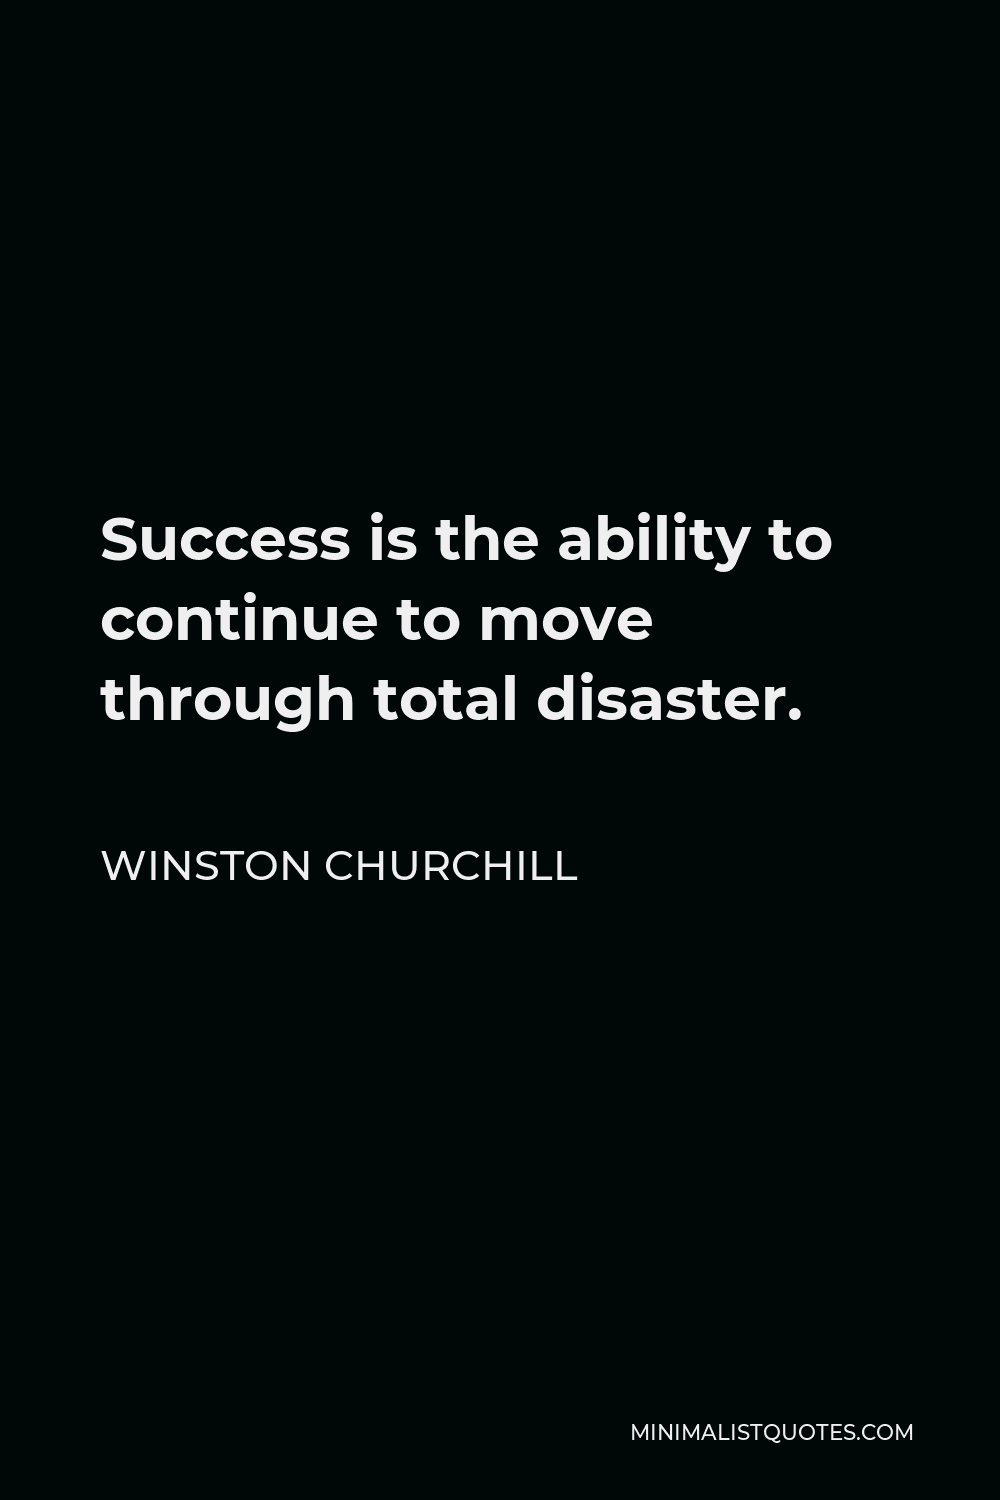 Winston Churchill Quote - Success is the ability to continue to move through total disaster.